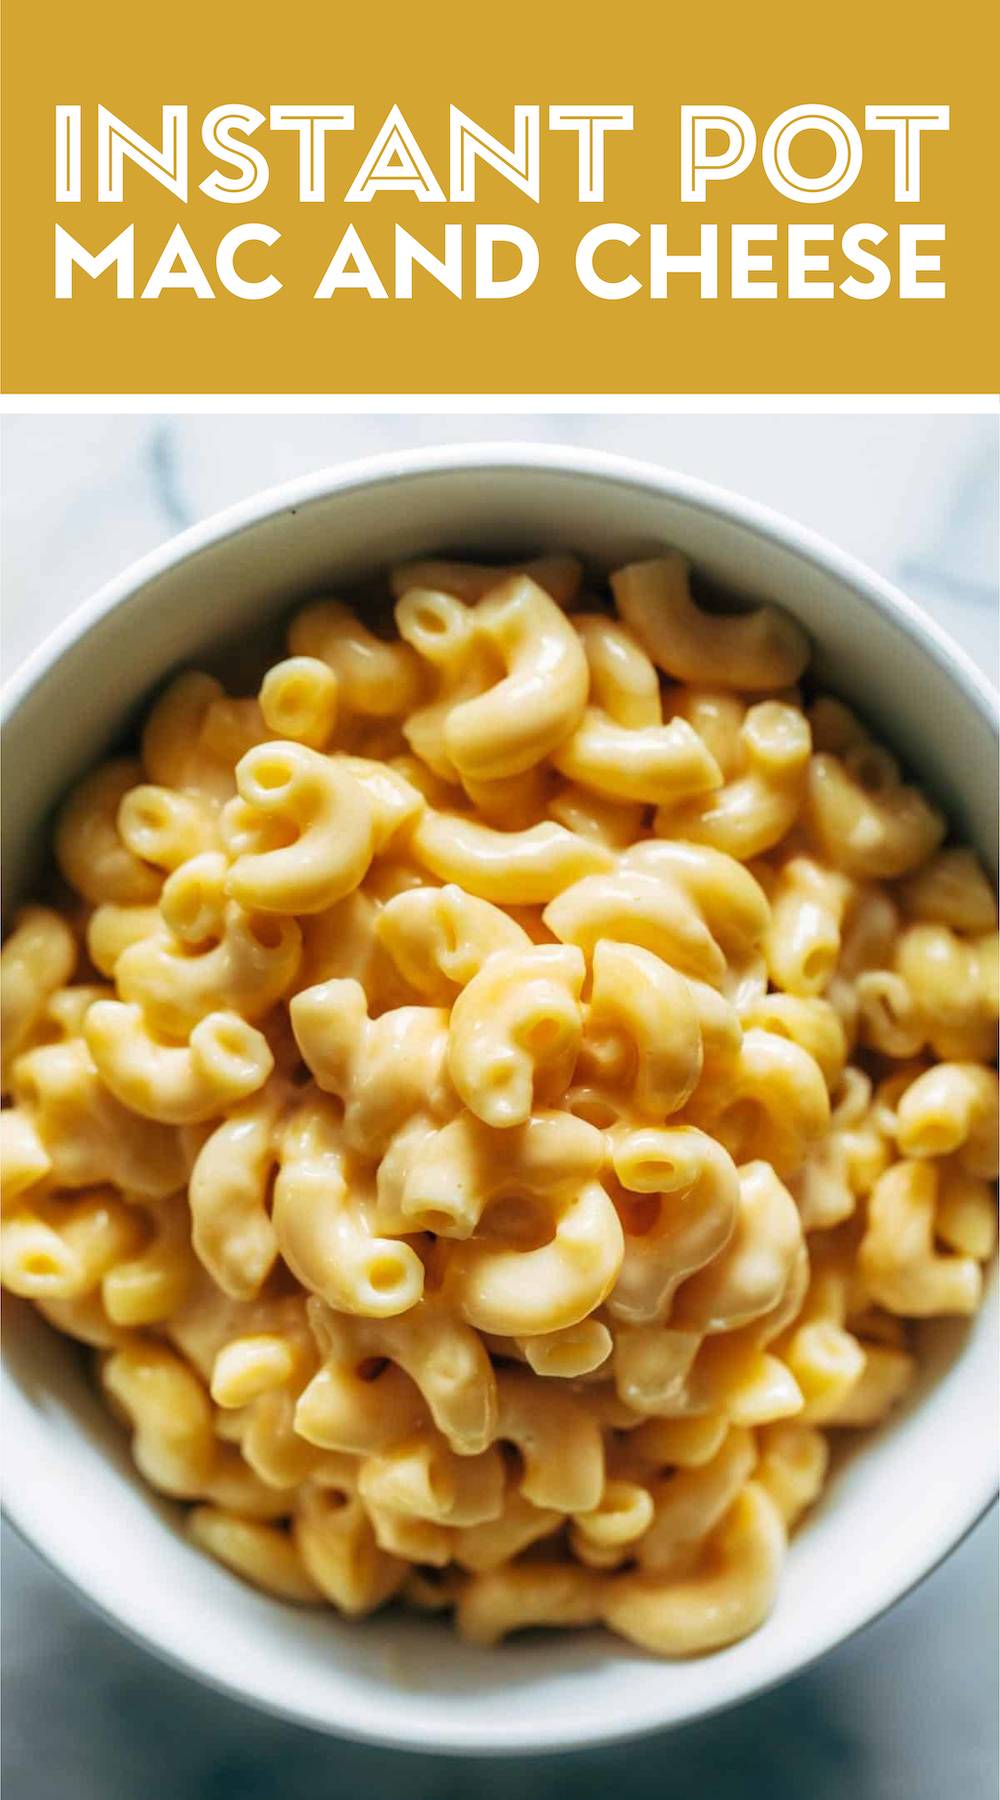 Instant Pot Mac and Cheese Recipe - Pinch of Yum